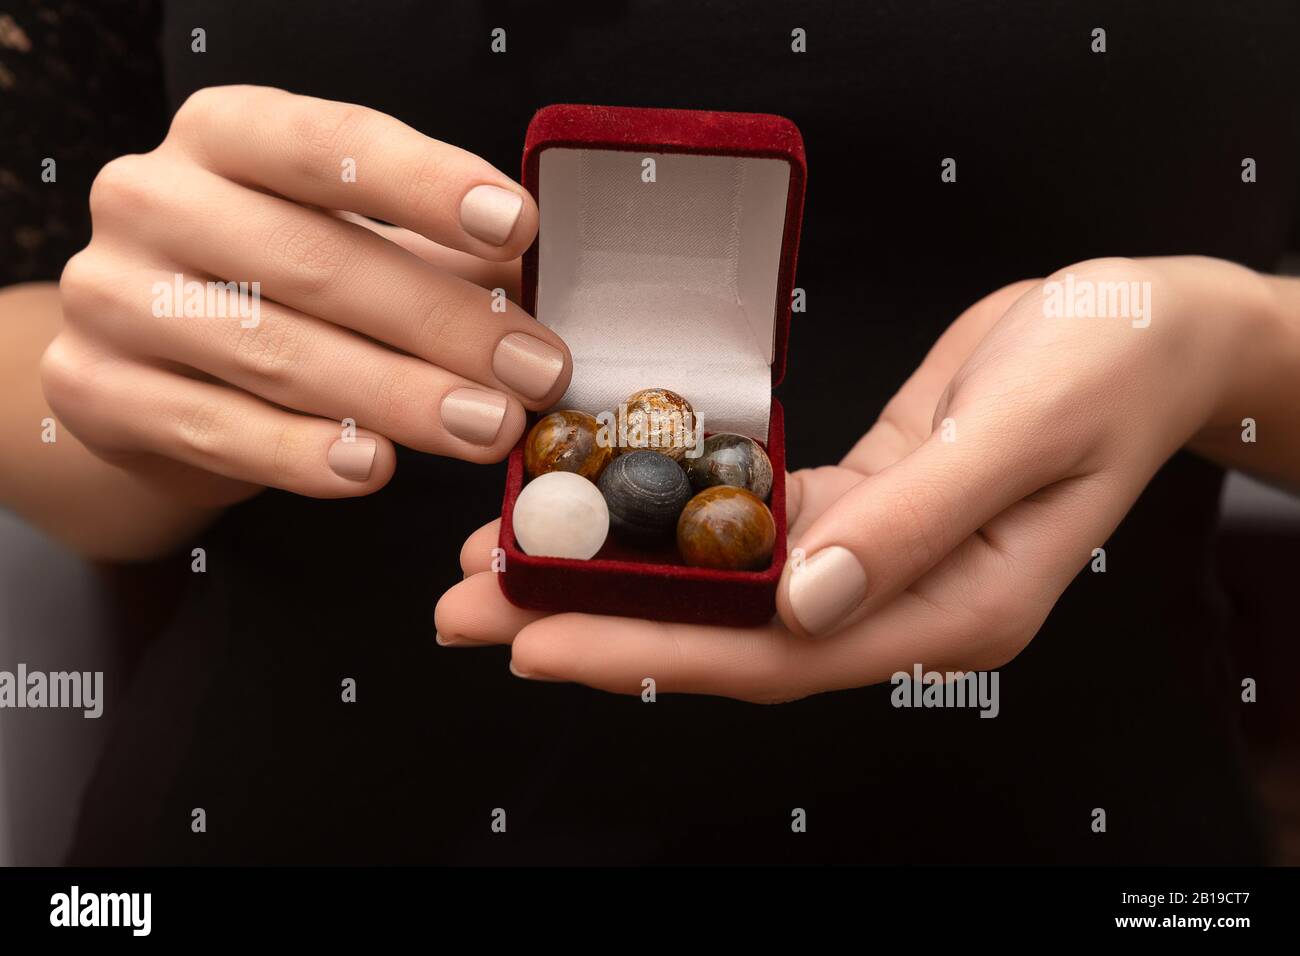 Sets of round stones in female hands on black background. Stock Photo